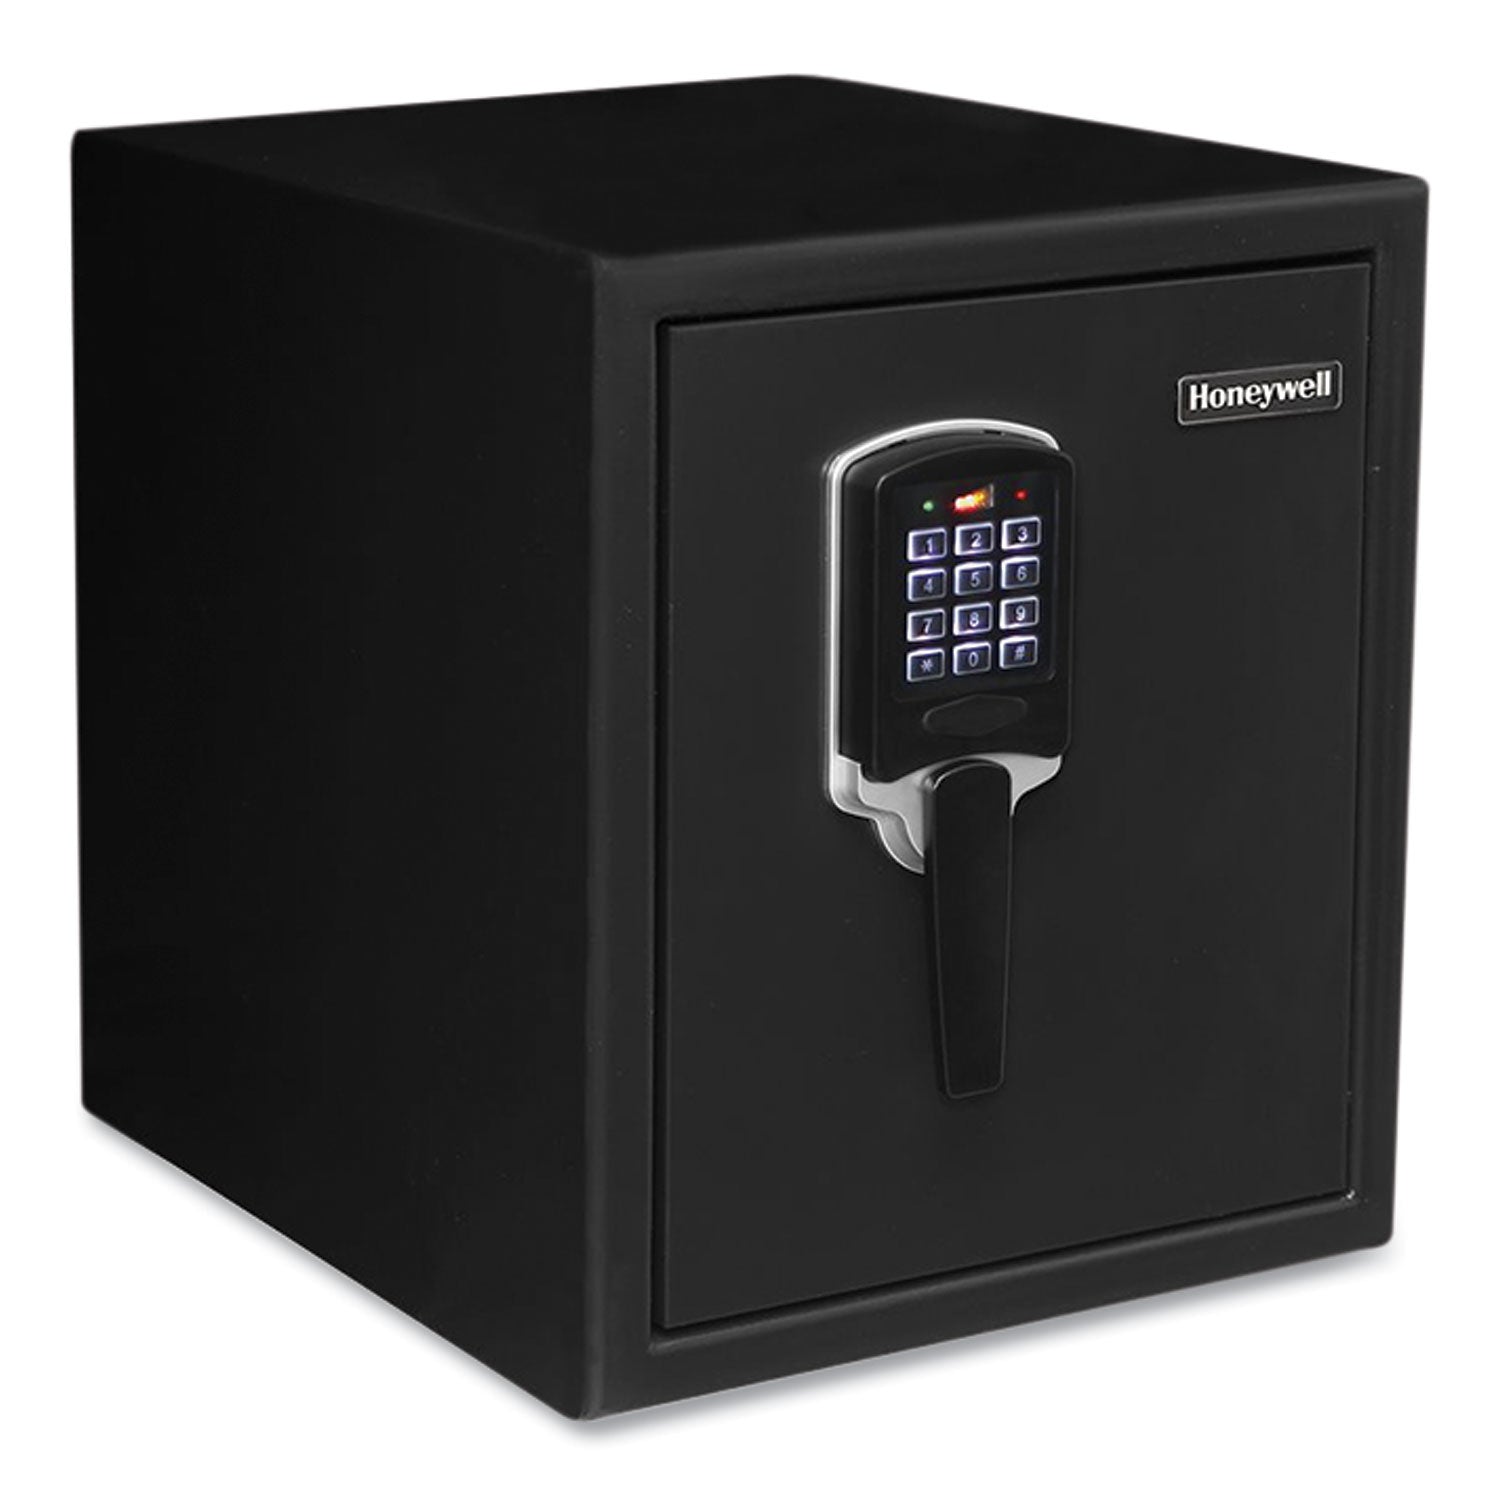 digital-security-steel-fire-and-waterproof-safe-with-keypad-and-key-lock-146-x-202-x-177-09-cu-ft-black_hwl2605 - 1